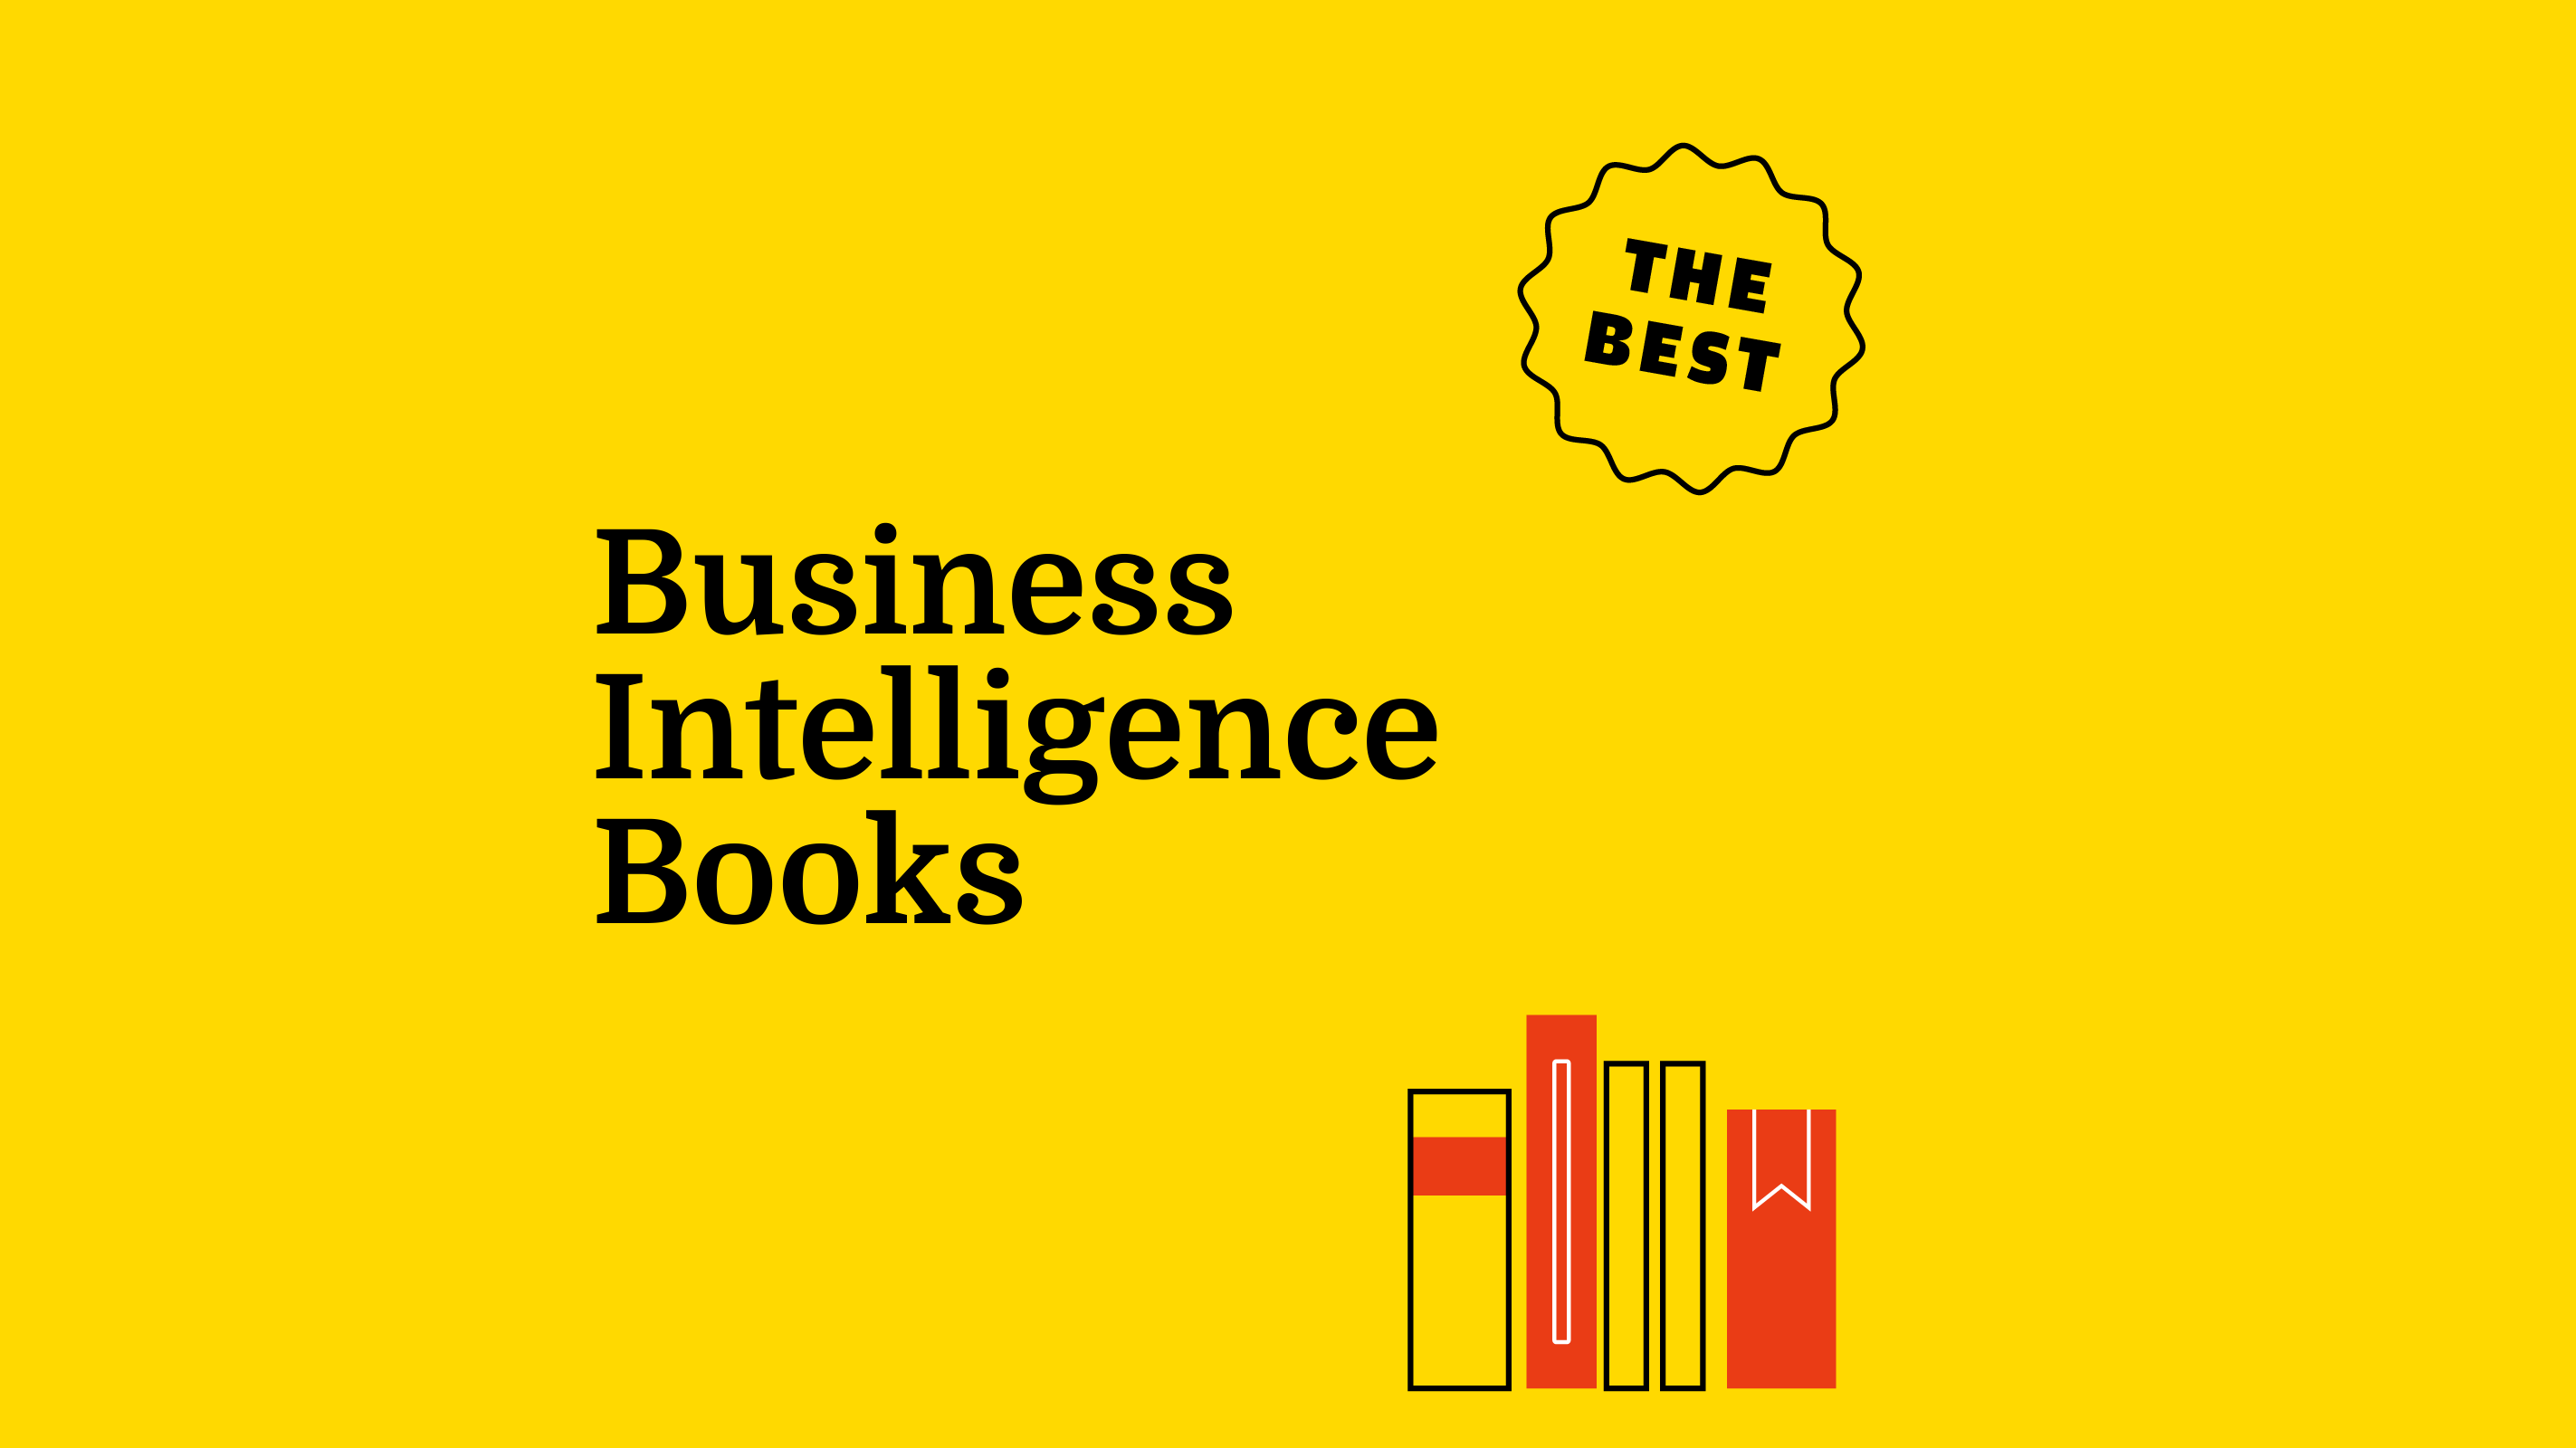 REV-business-intelligence-books-featured-image-3513